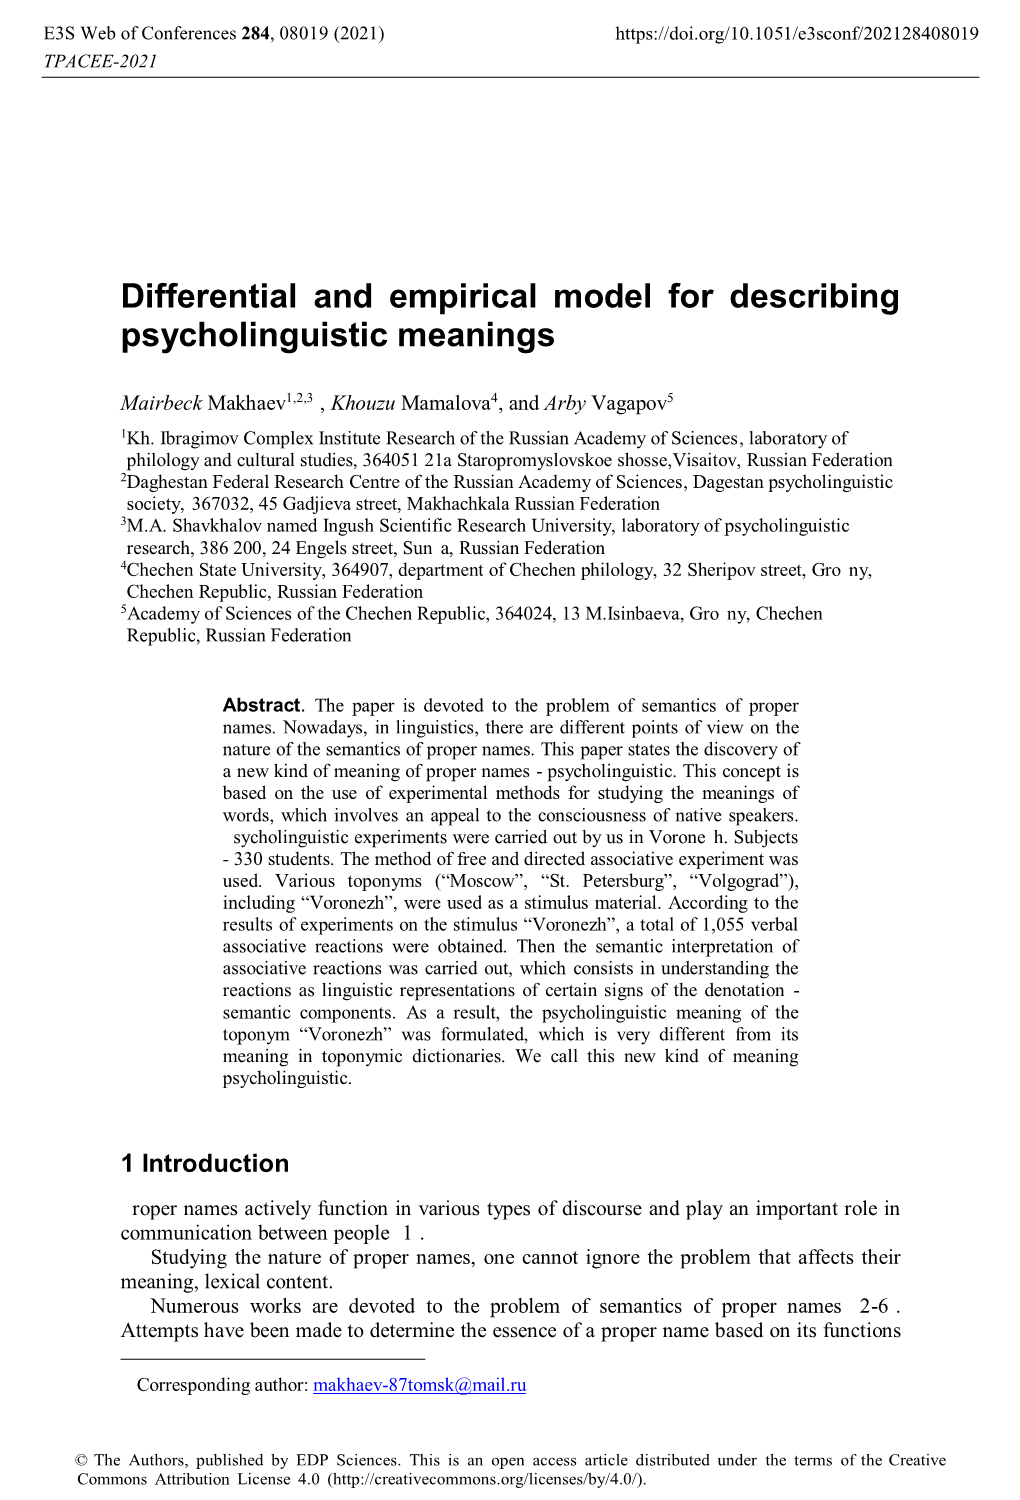 Differential and Empirical Model for Describing Psycholinguistic Meanings